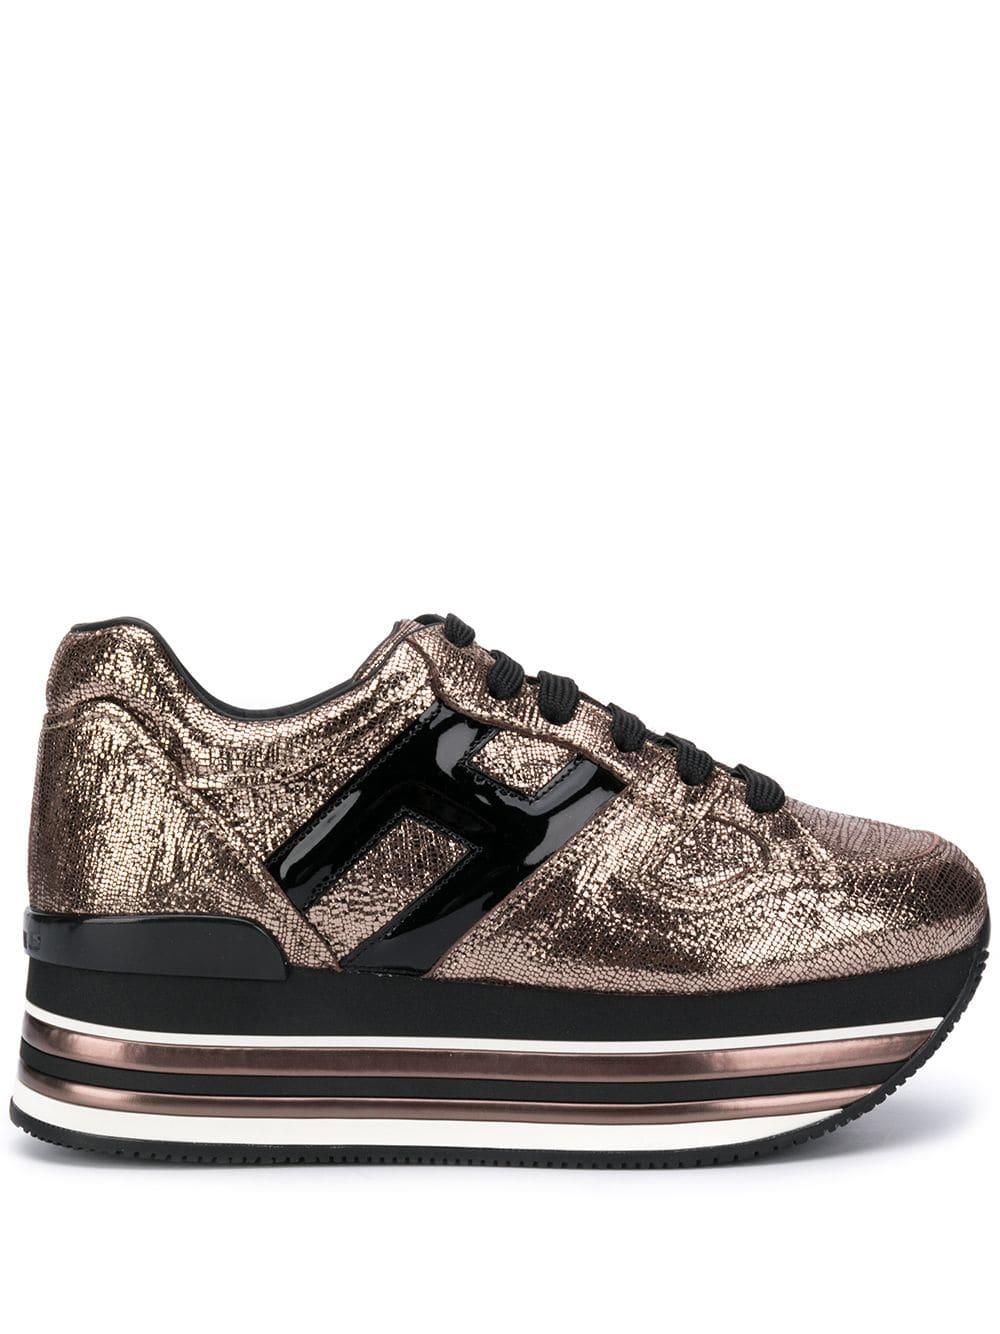 Hogan Leather Maxi H222 Sneakers in Gold (Metallic) - Save 12% - Lyst